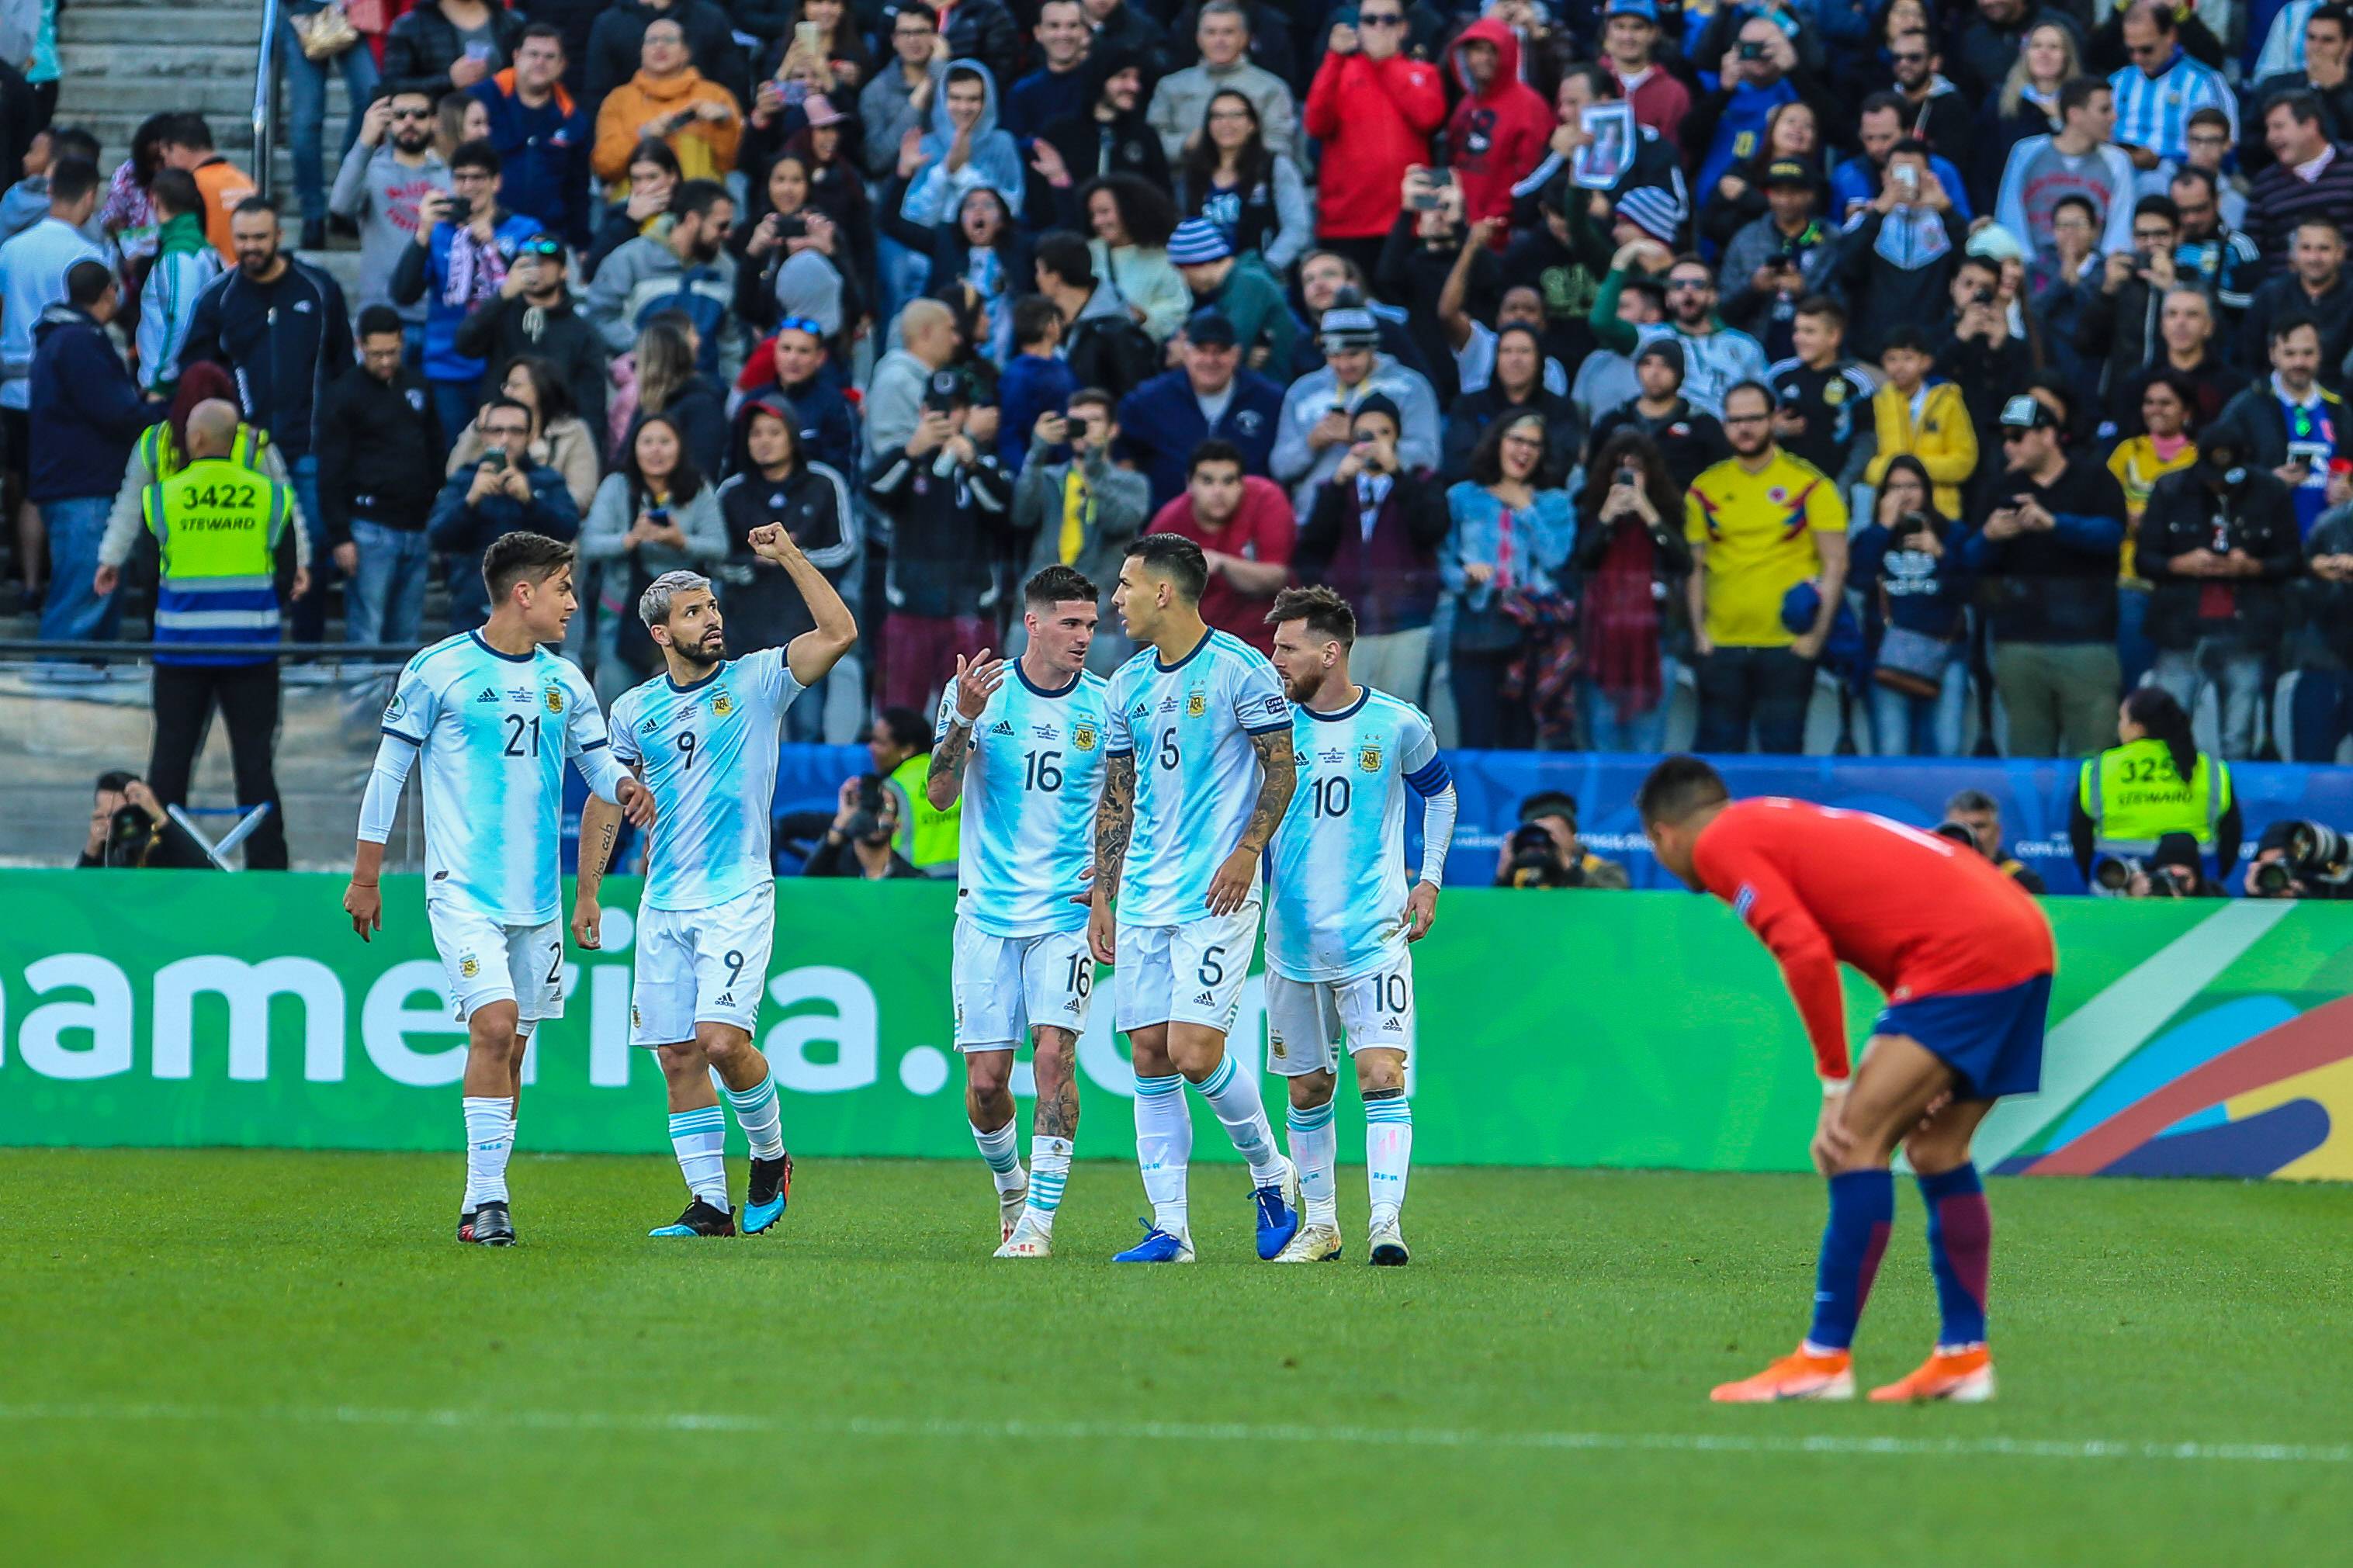 July 6, 2019 Brazil Aguero Celebrate Goal In The Game Of The Match Between Argentina X Chile Val